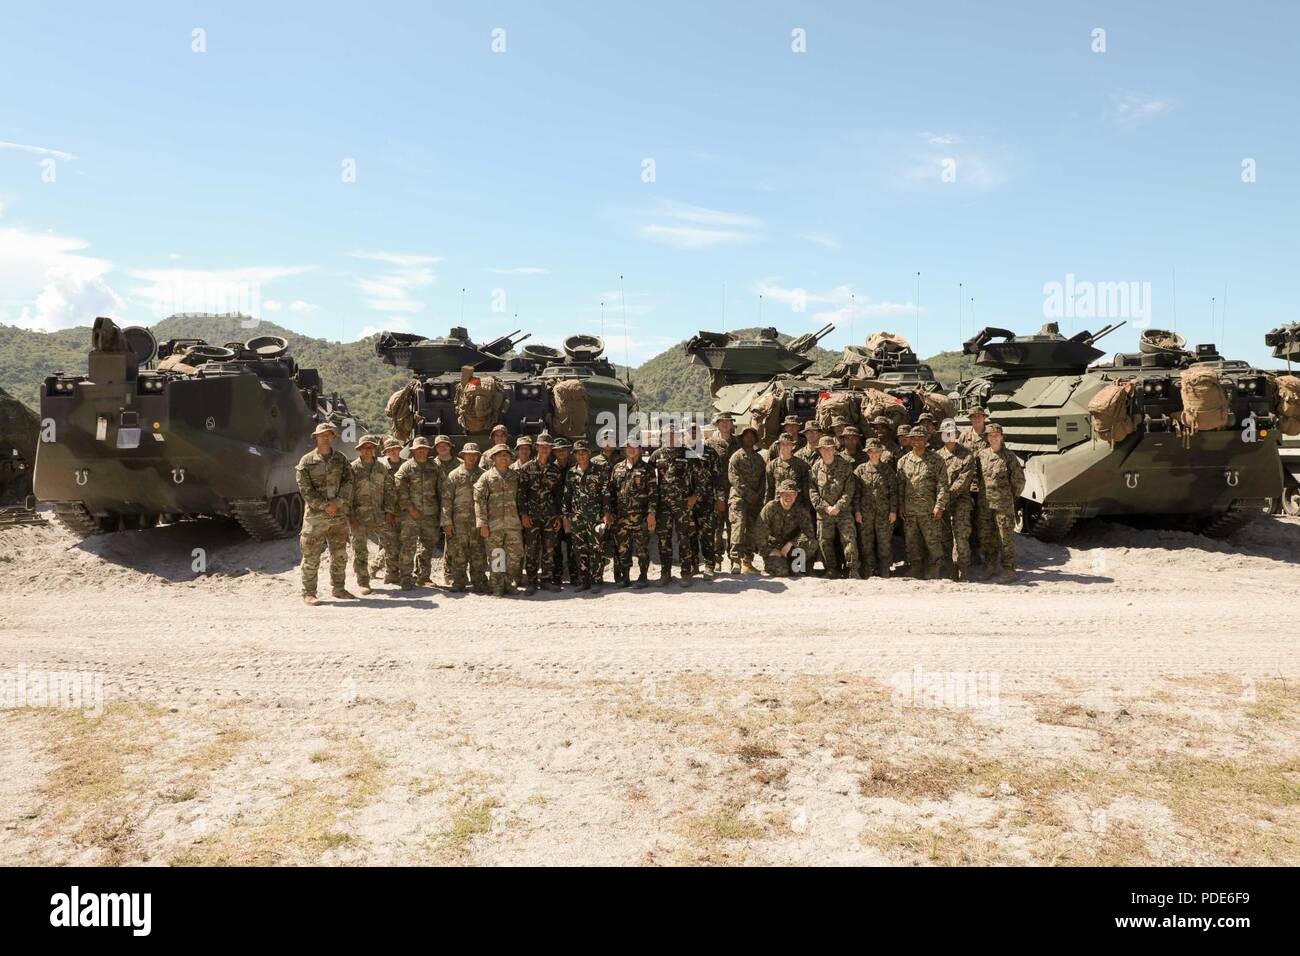 Philippine Army soldiers from the 72nd Division Reconnaissance Company, 7th Infantry Division, along with U.S. service members from 1st Battalion, 21st Infantry Regiment, 2nd Infantry Brigade Combat Team, 25th Infantry Division and 3rd Medical Battalion, 3rd Marine Logistics Group, gather for a Stock Photo